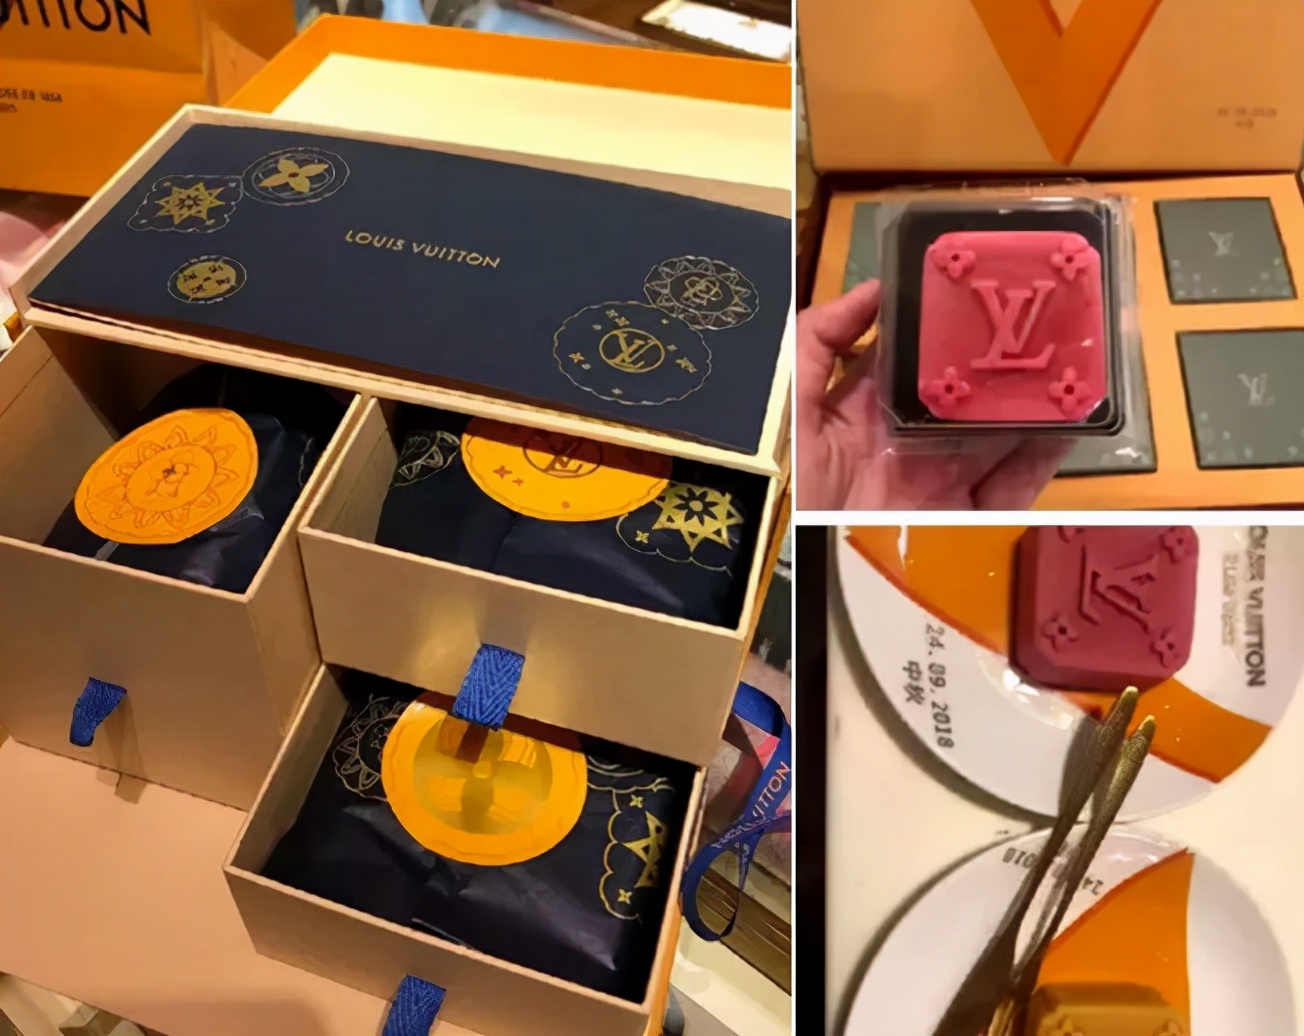 LV also has moon cakes?The car overturned as soon as it burst red